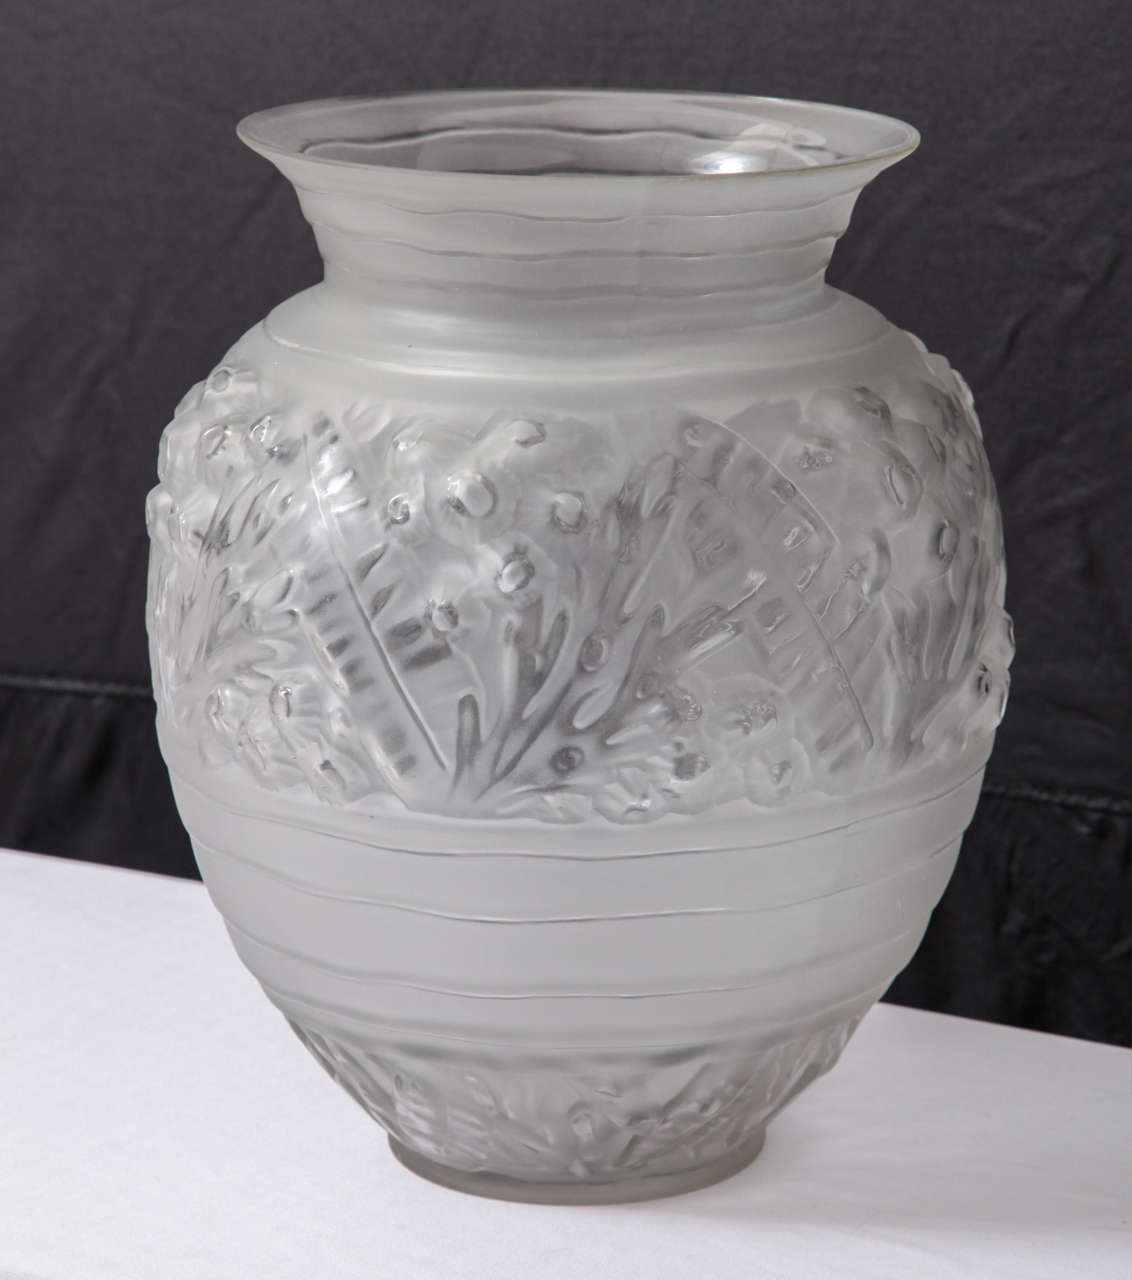 Signed by French designer Sabino.This Art Deco vase is composed of clear,opalescent glass molded with geometric flower reliefs.